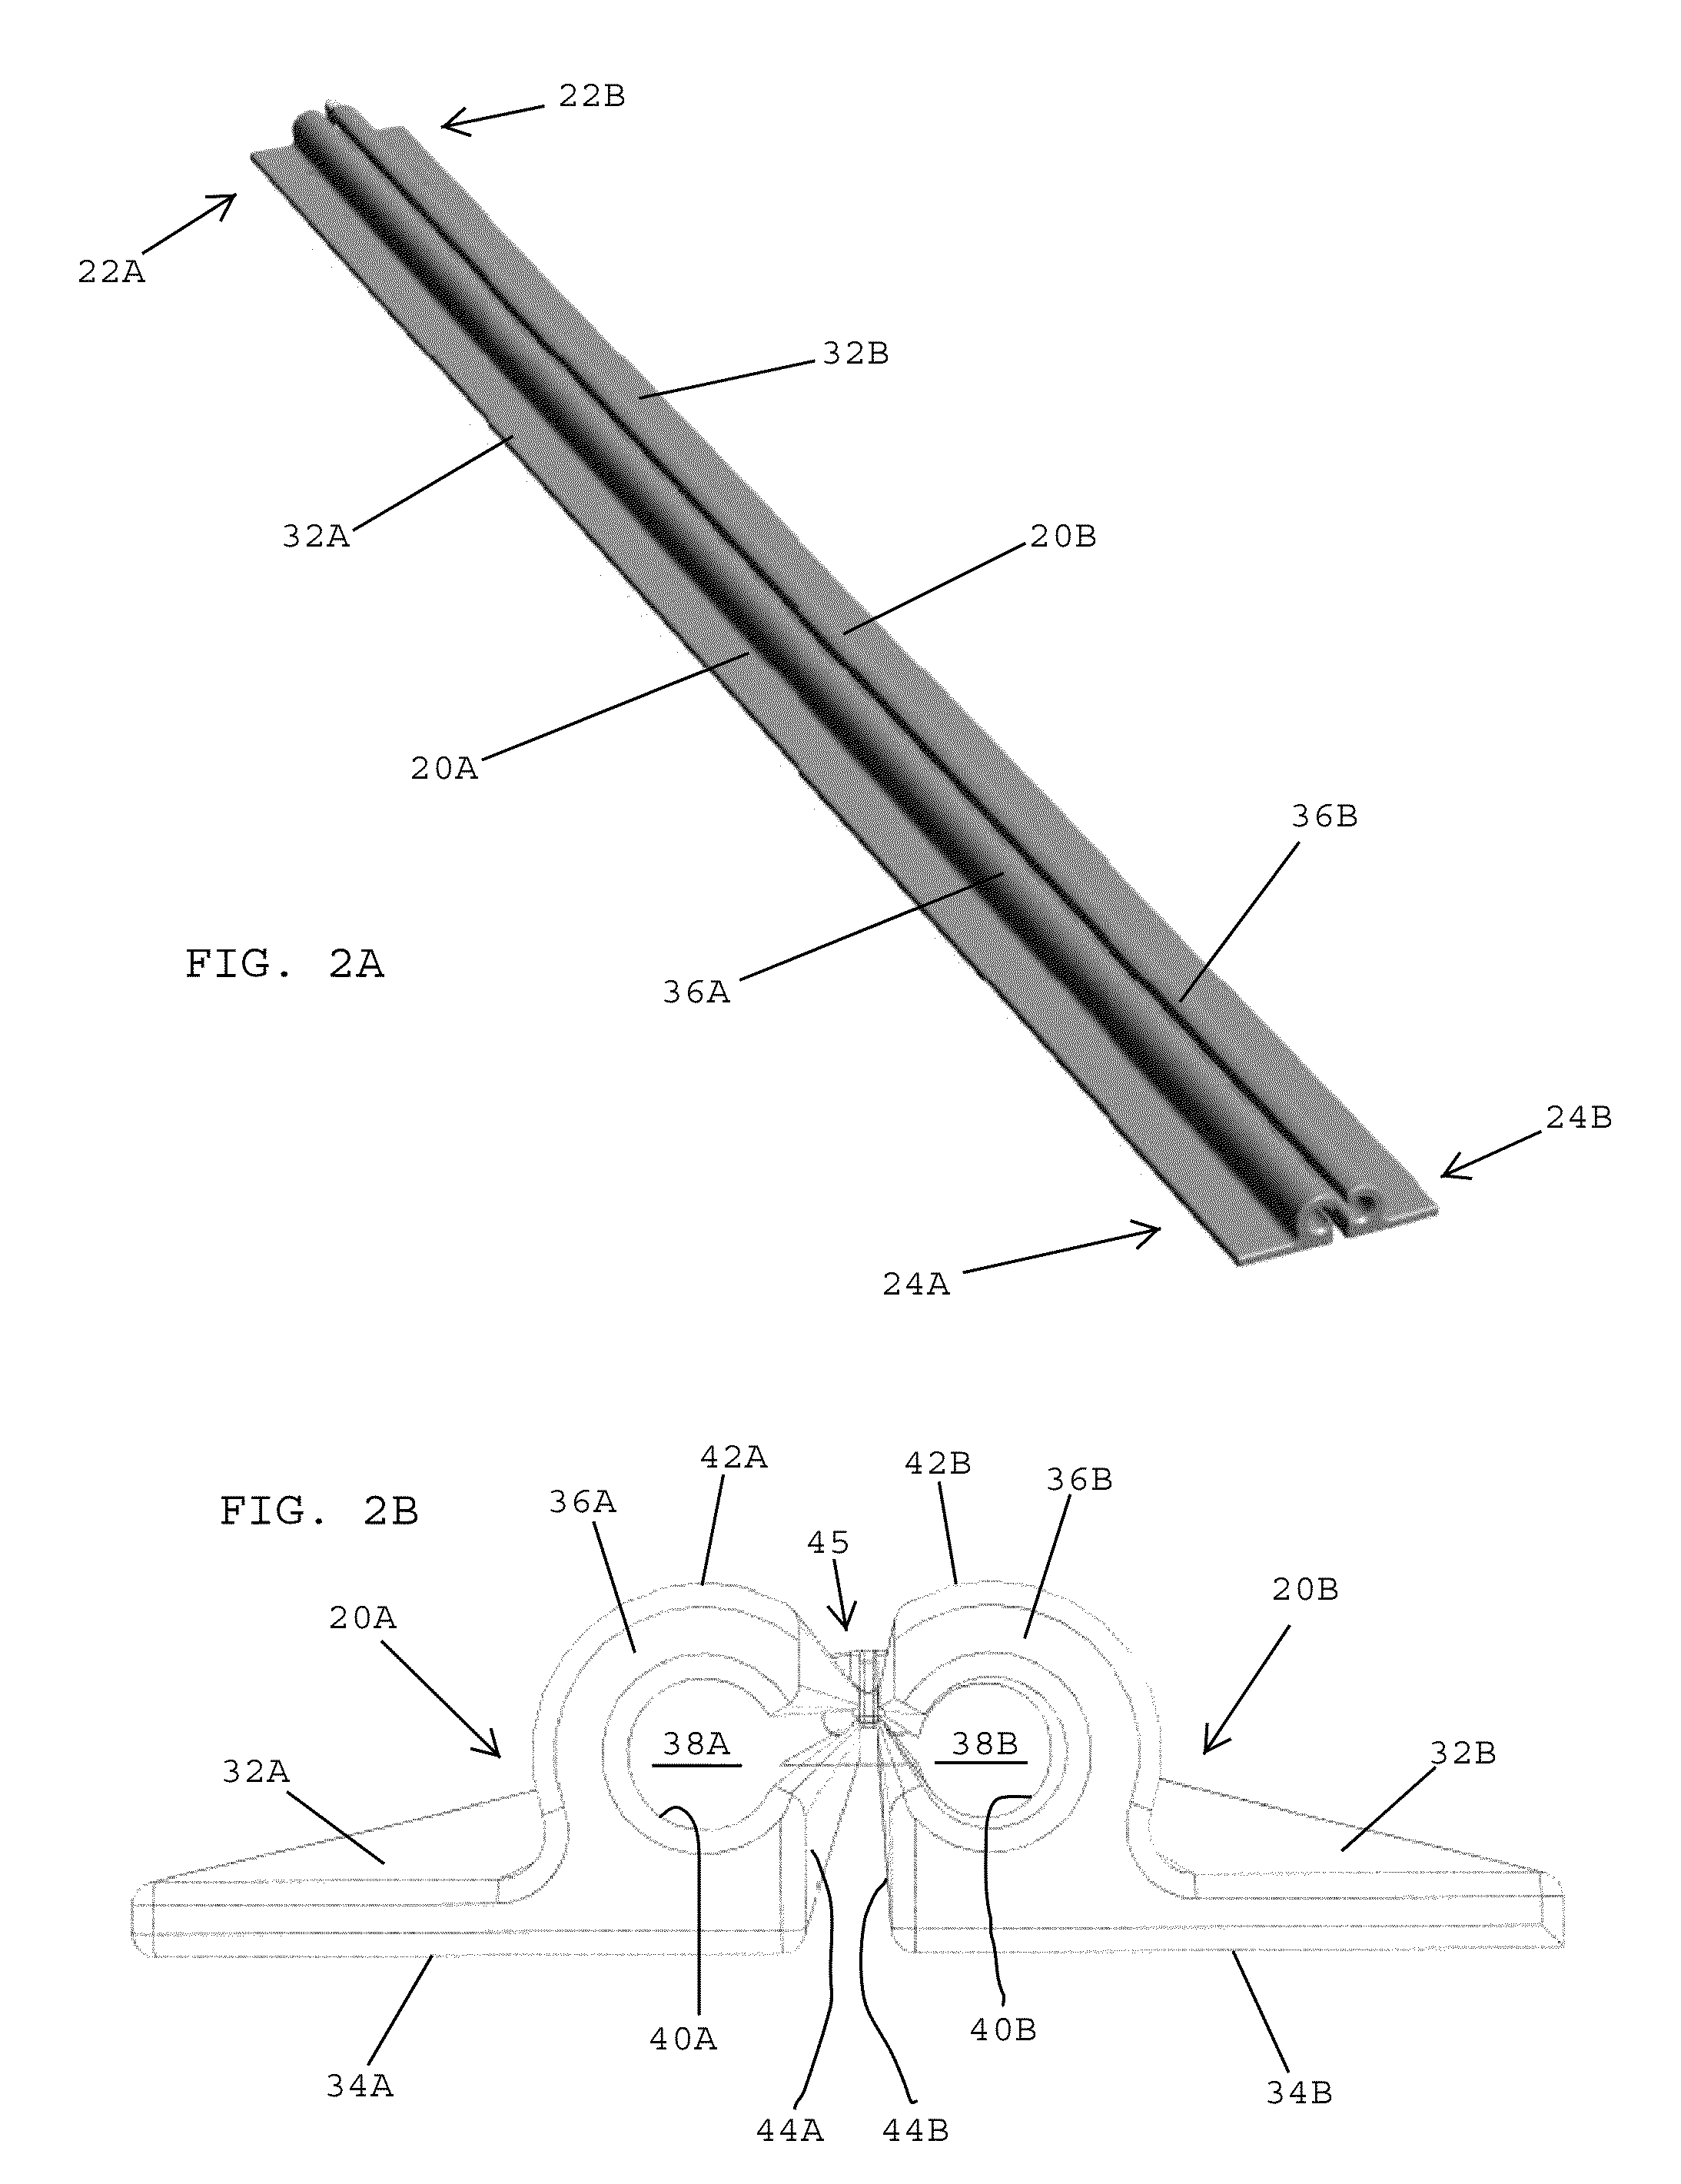 Incision guide and wound closure device and methods therefor